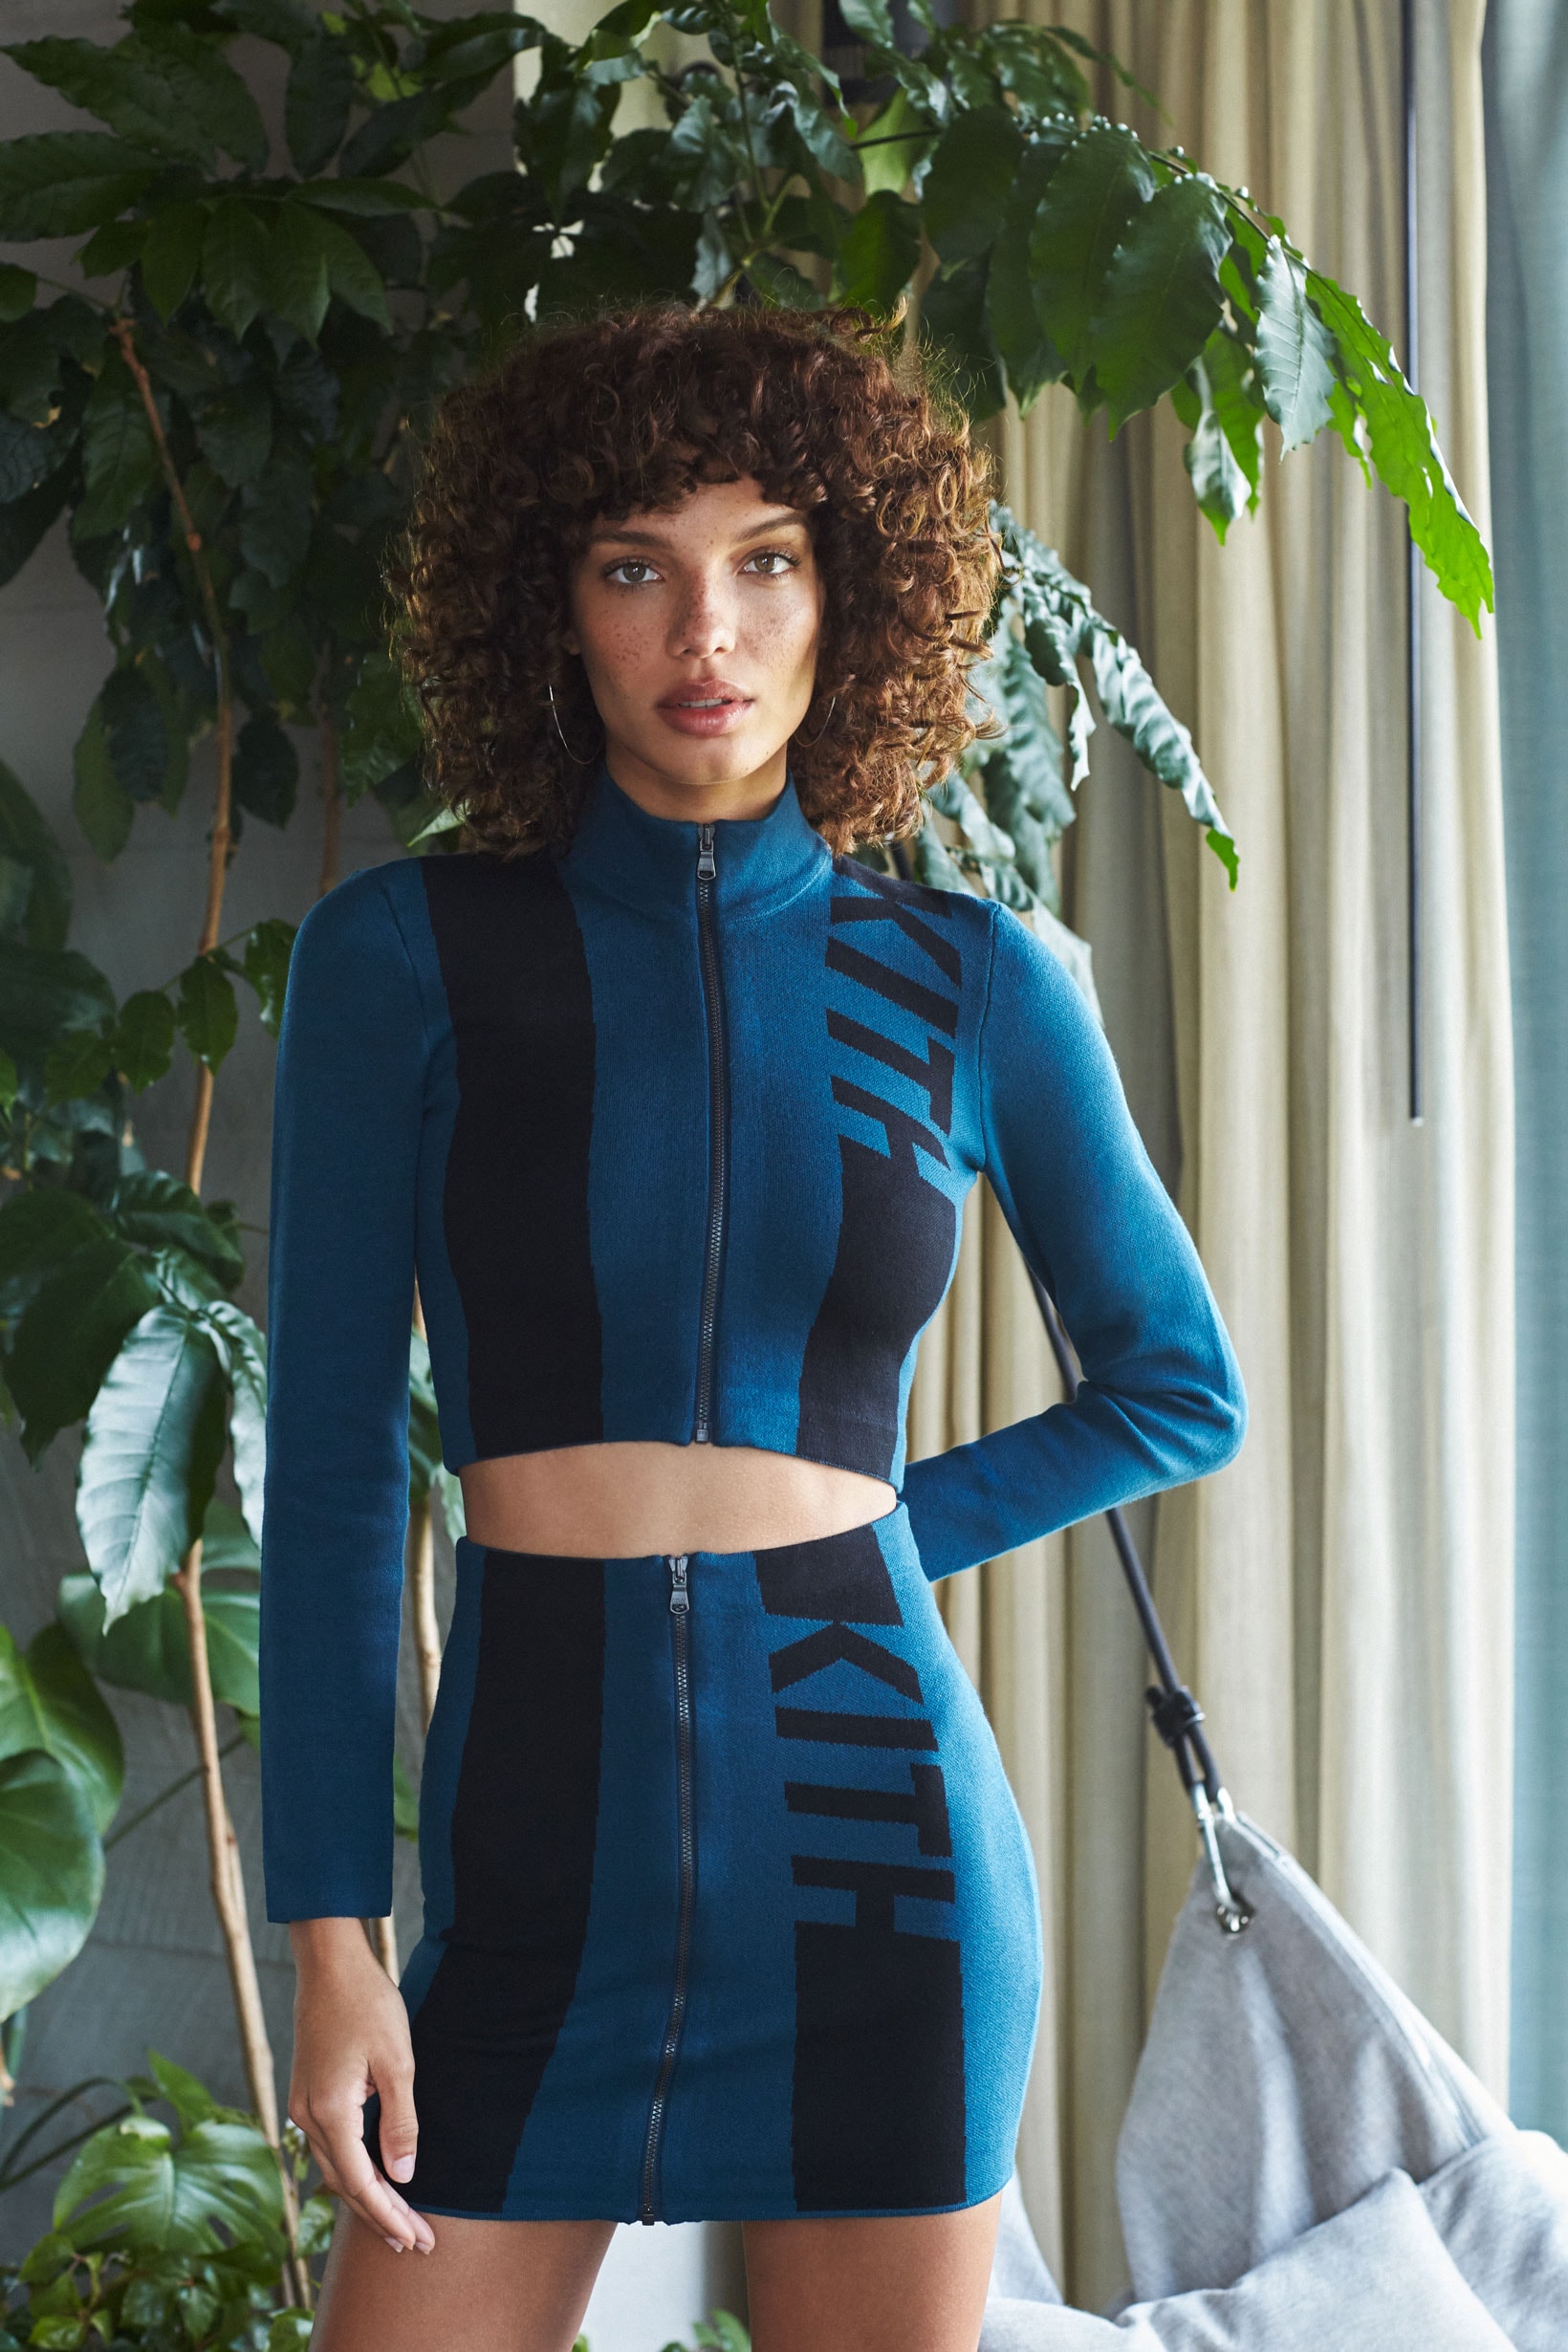 KITH Women Fall 2019 Collection Drop 1 Sweater Skirt Blue Black